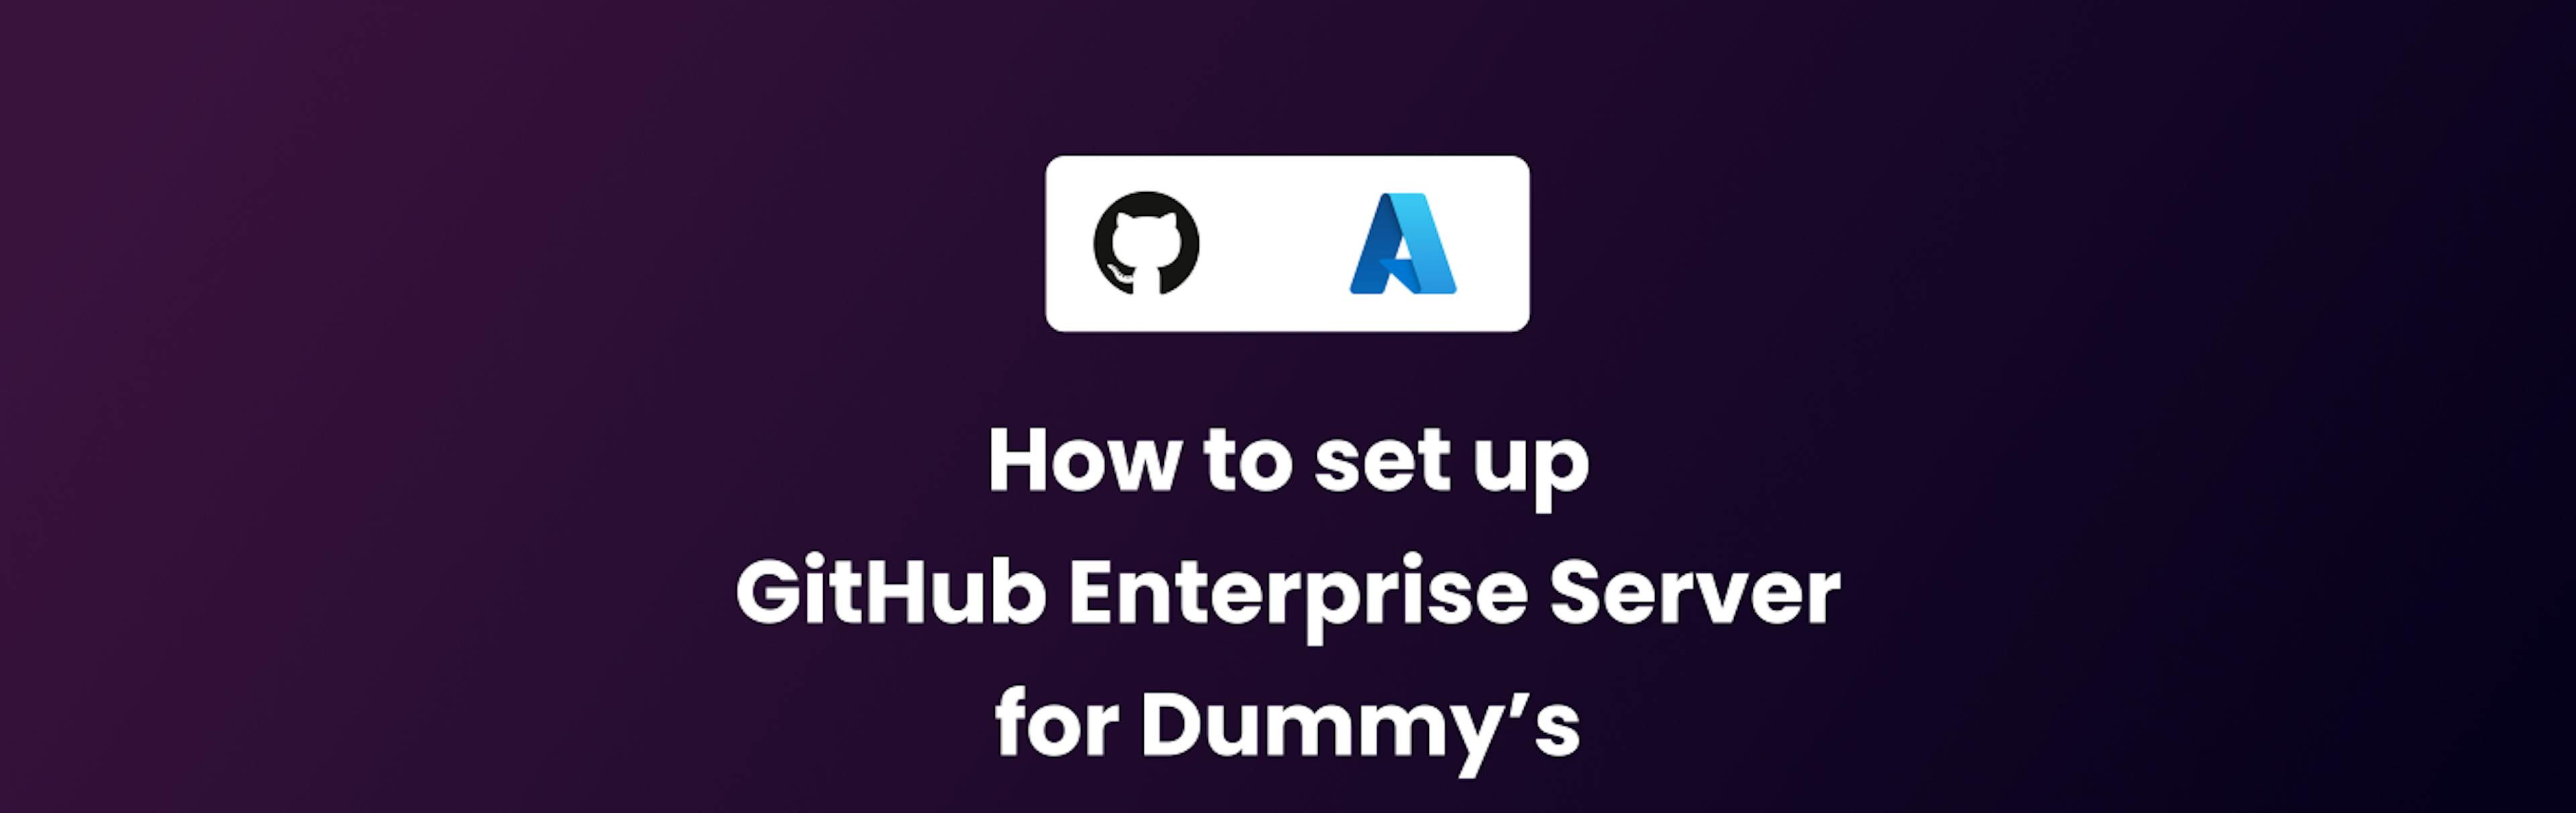 featured image - How to Set up GitHub Enterprise Server on Azure (for Dummies)